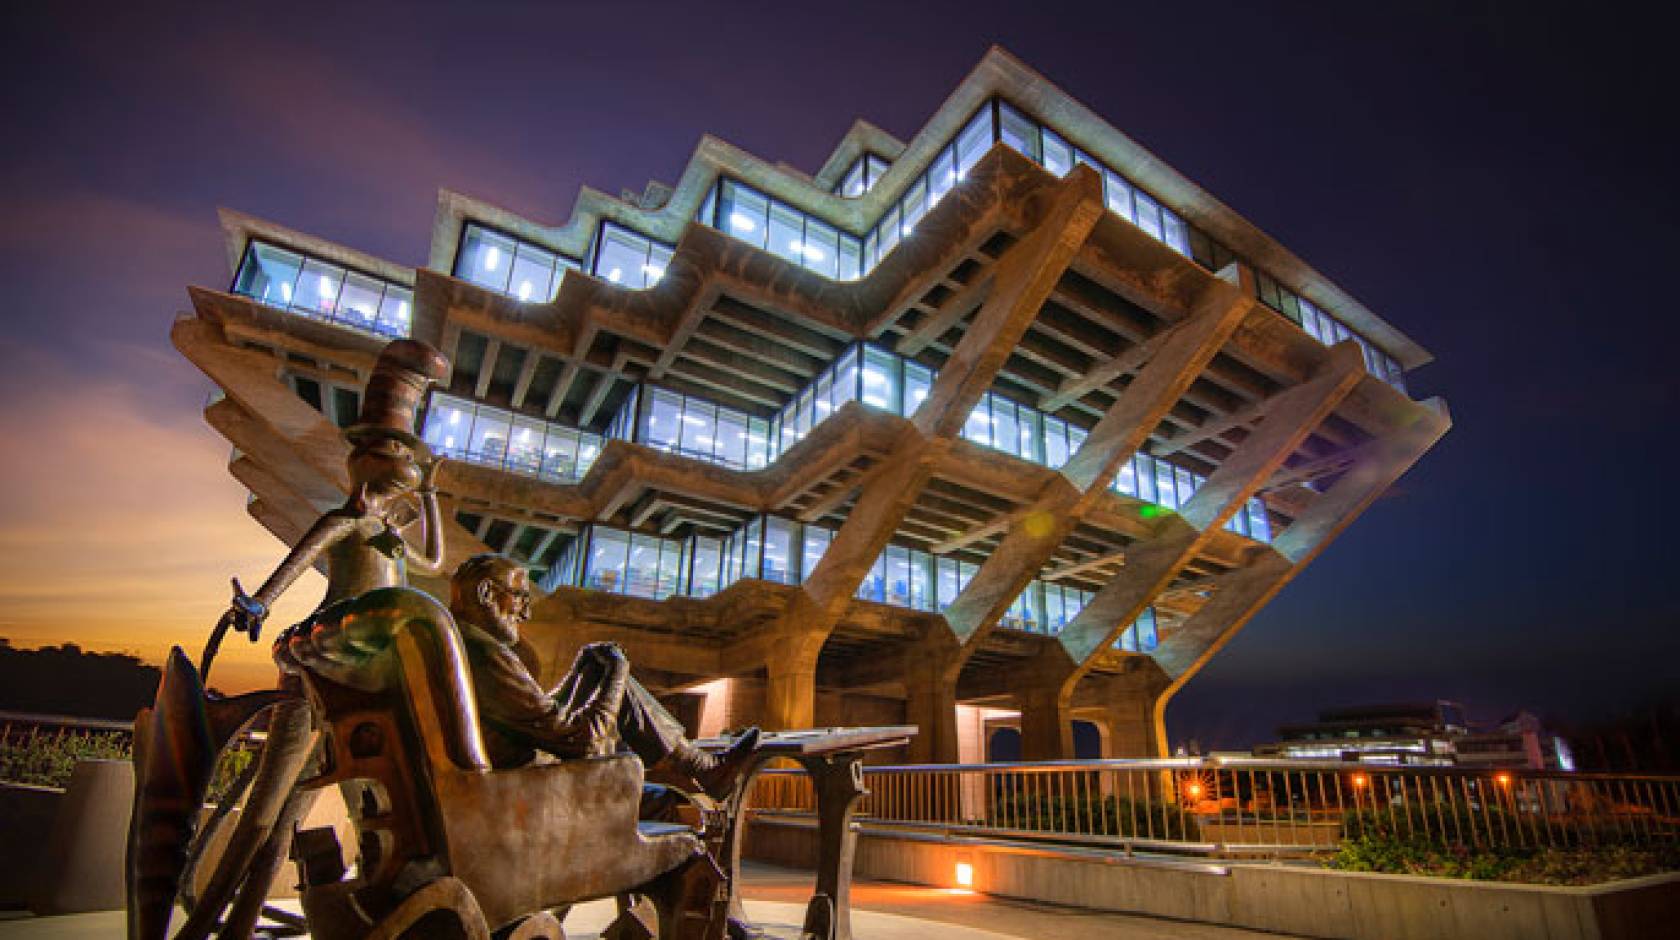 Geisel Library at night